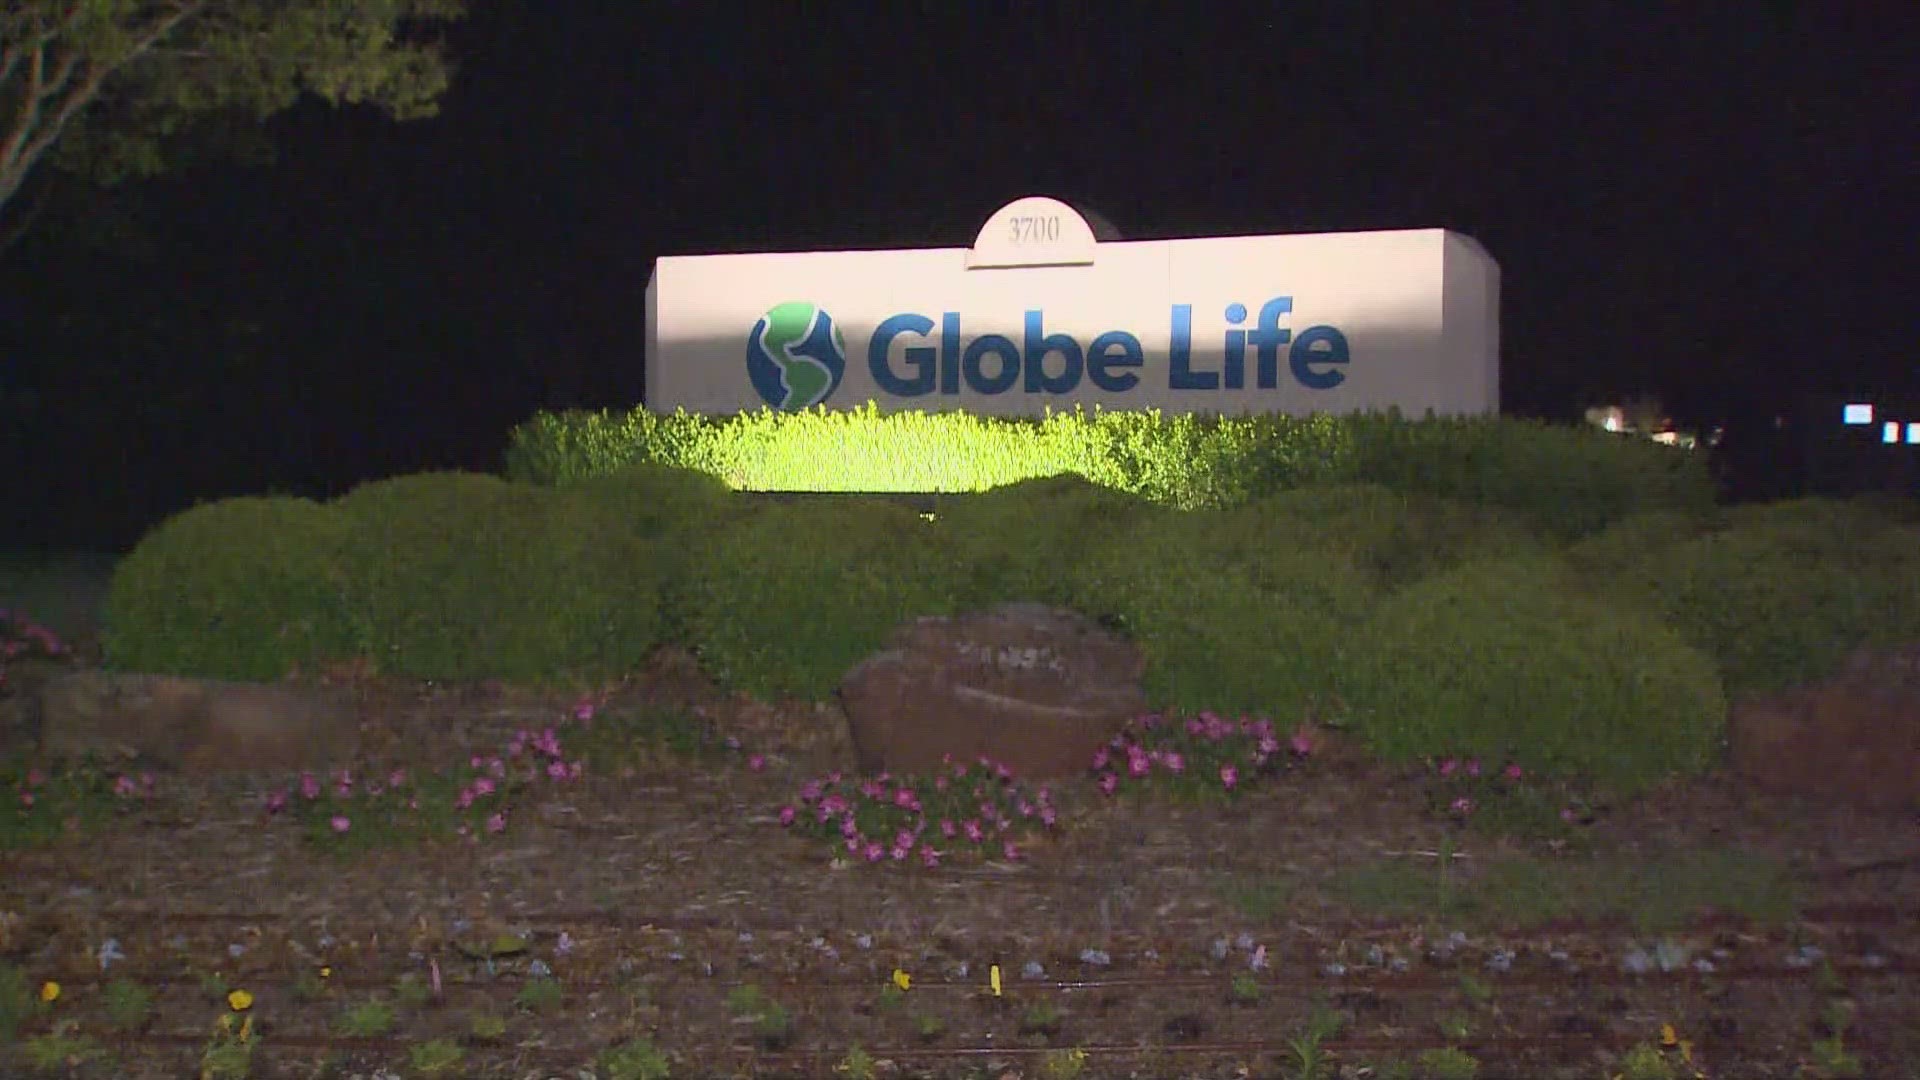 Globe Life Stock dropped from almost $100 per share Thursday morning to less than $40 that afternoon.